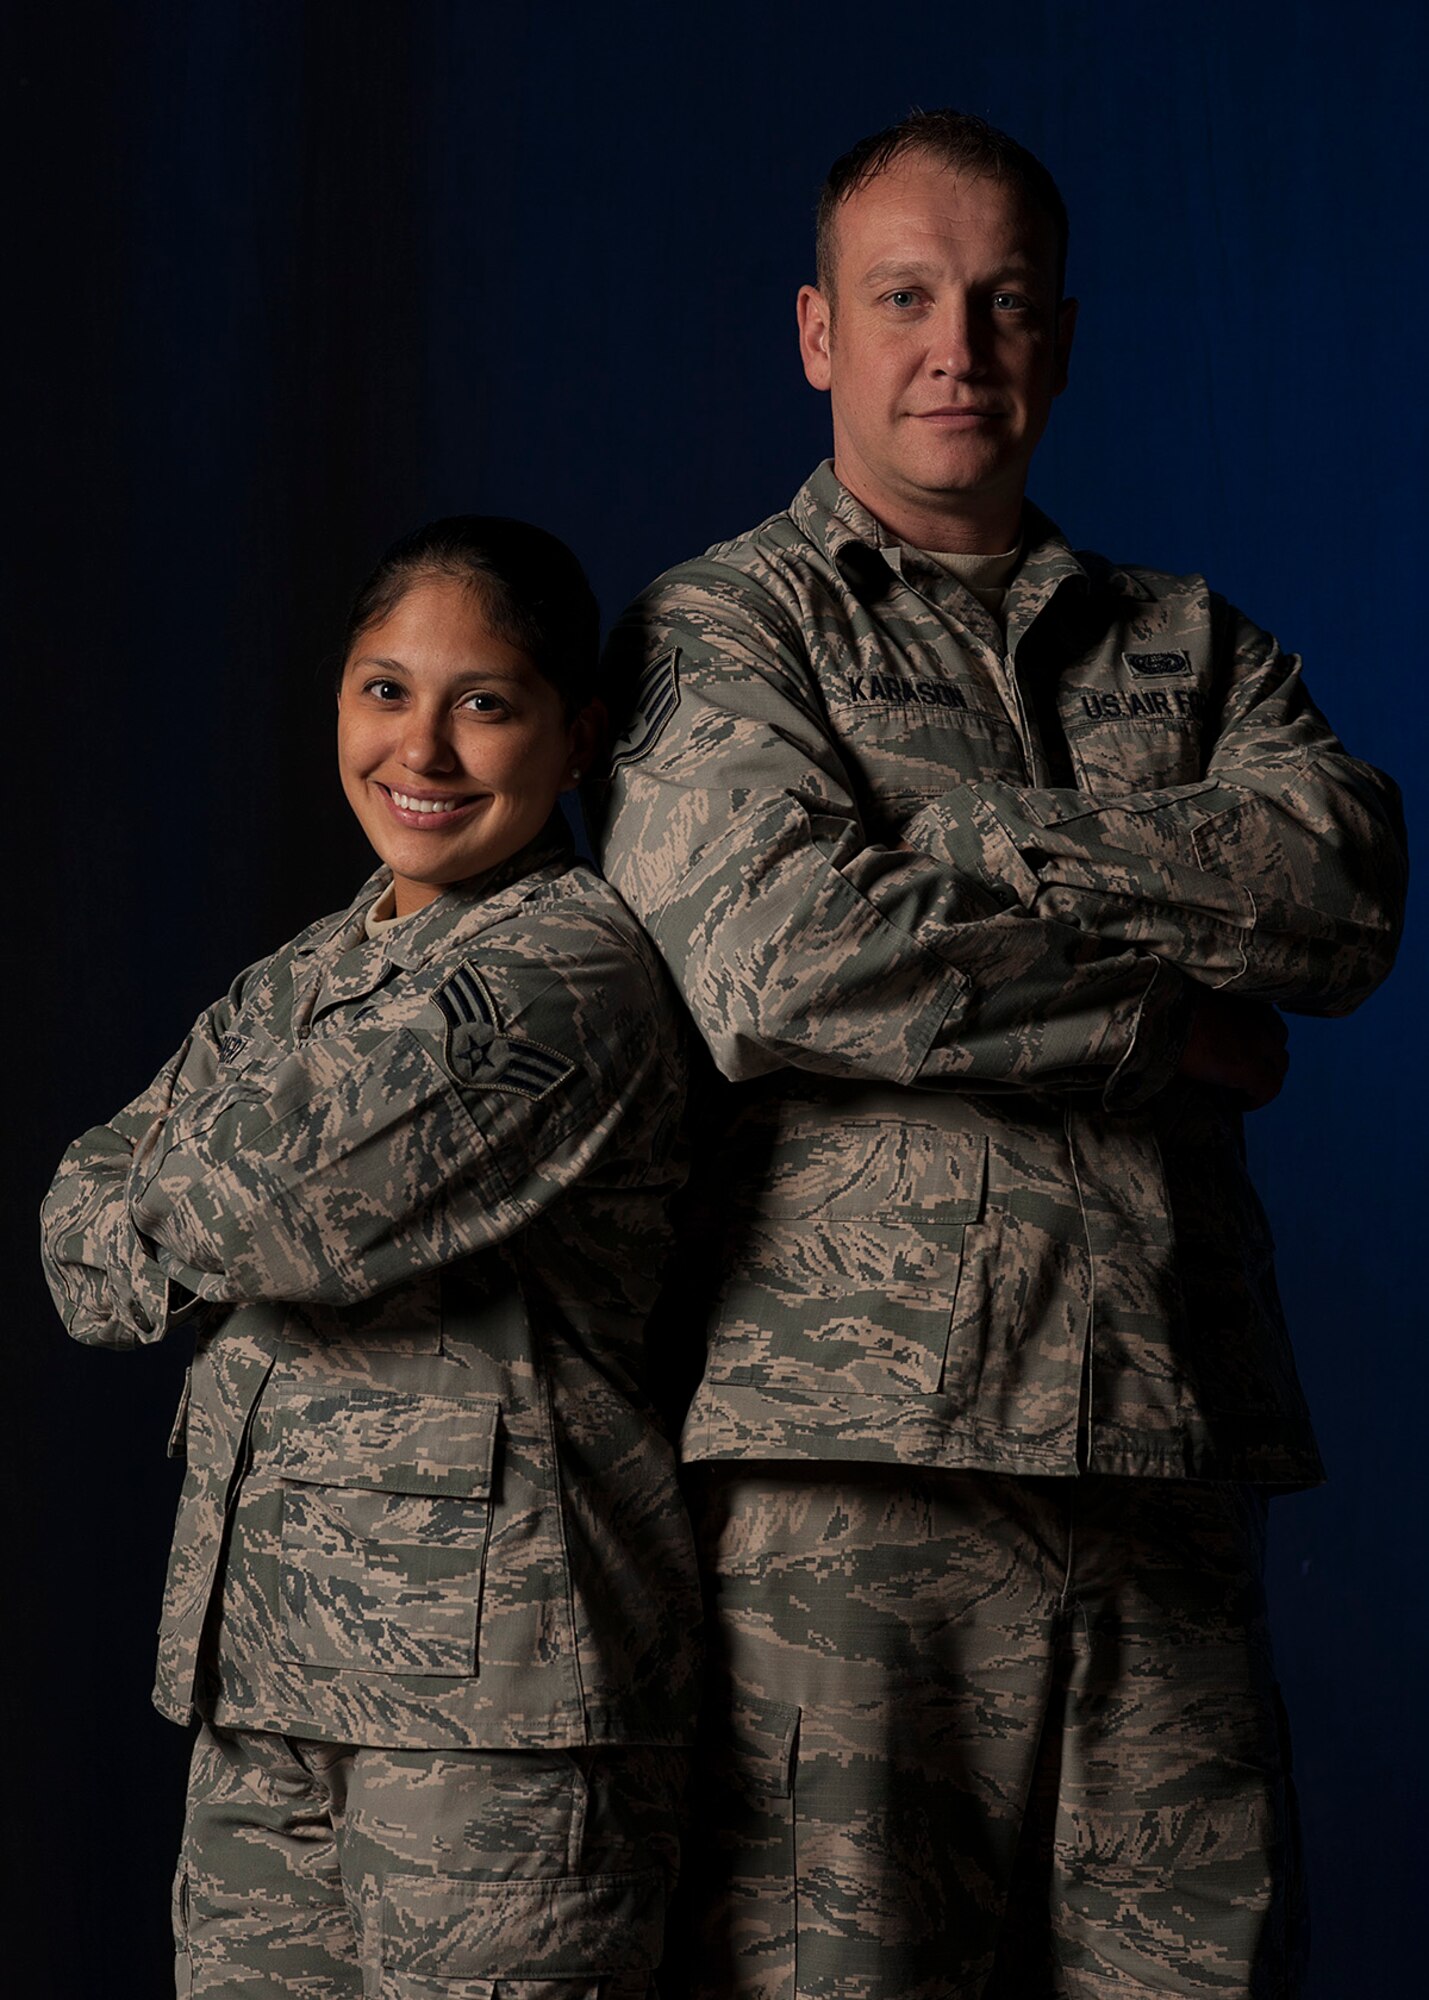 Senior Airman Sarah Cabrera, 614th Air and Space Operations Center administrator, and Staff Sgt. Bryan Karason, 30th Force Support Squadron NCOIC of assignments, recently helped rescue a family from a car wreck, Oct. 25, 2015, in Goleta, Calif. After assessing the situation, the Airmen instinctively sprung to action using basic Self-Aid and Buddy Care techniques. (U.S. Air Force photo by Senior Airman Kyla Gifford/Released)